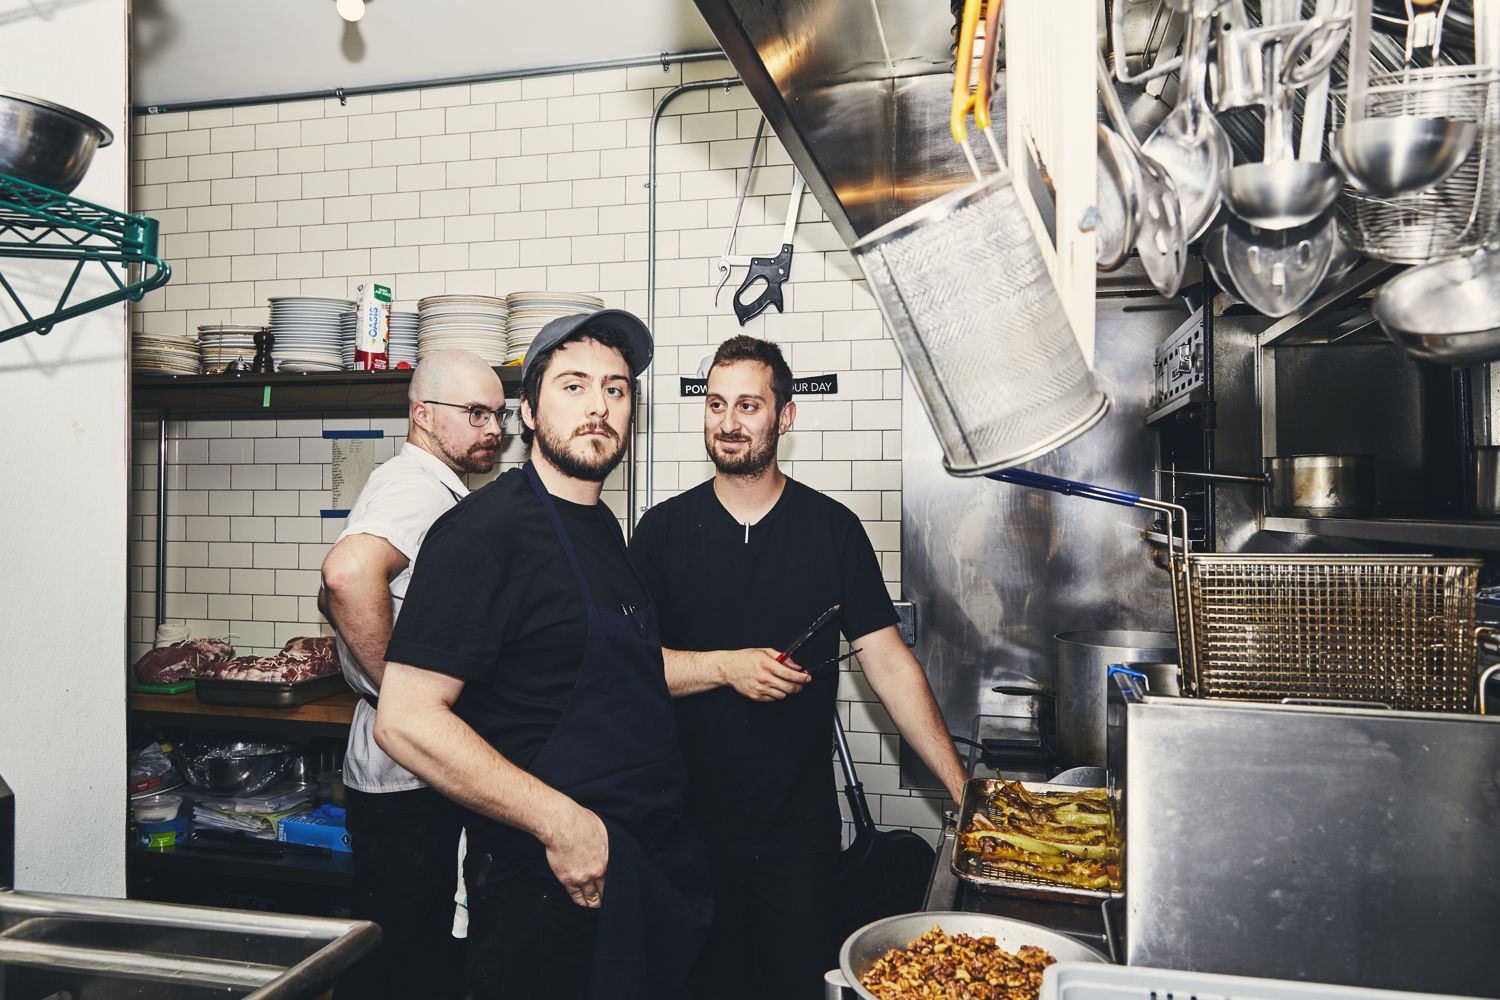 Dreyfus - Chef Zach Kolomeir, Thomas Creery and Dashiell Konkin
are all business in the kitchen.
Le chef Zach Kolomeir, Thomas Creery et Dashiell Konkin
triment sans relâche.
(Maude Chauvin/Air Canada enRoute magazine)